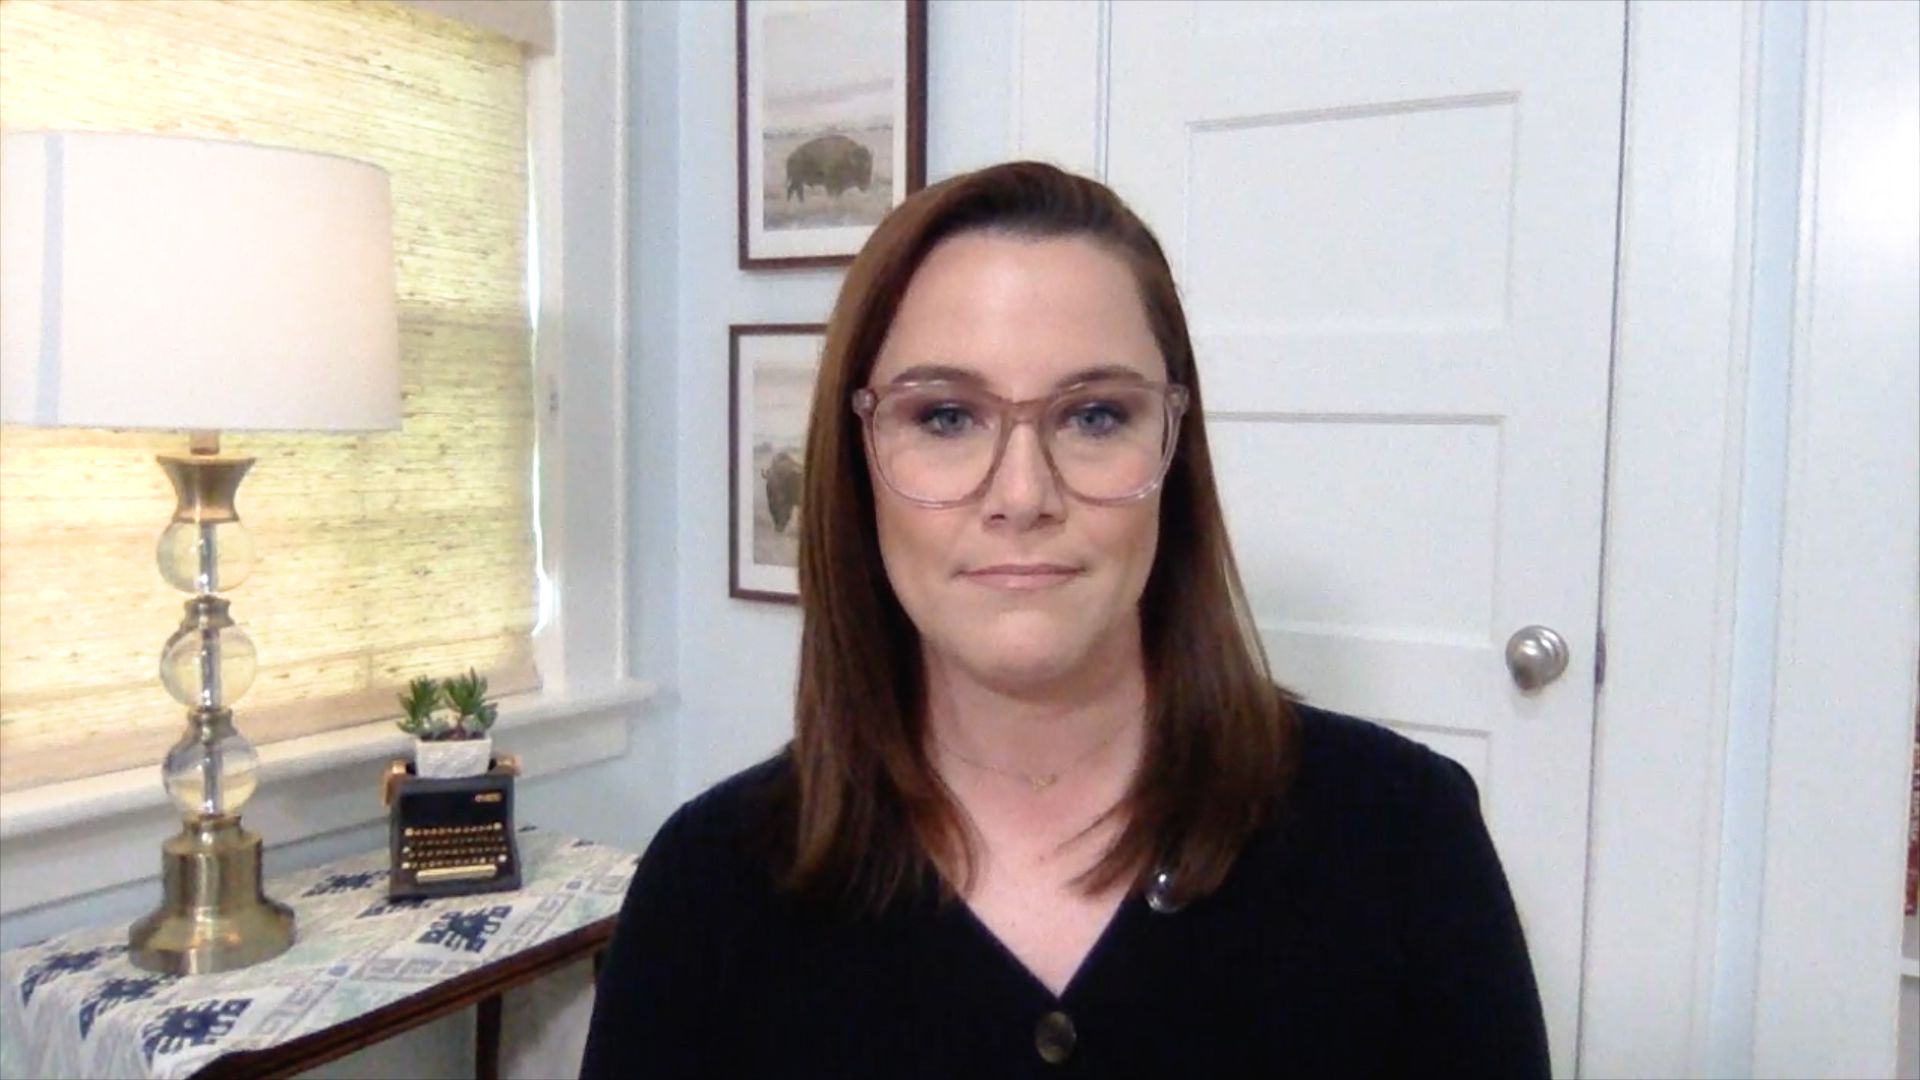 Video: SE Cupp: The Republican candidates who need to drop out immediately